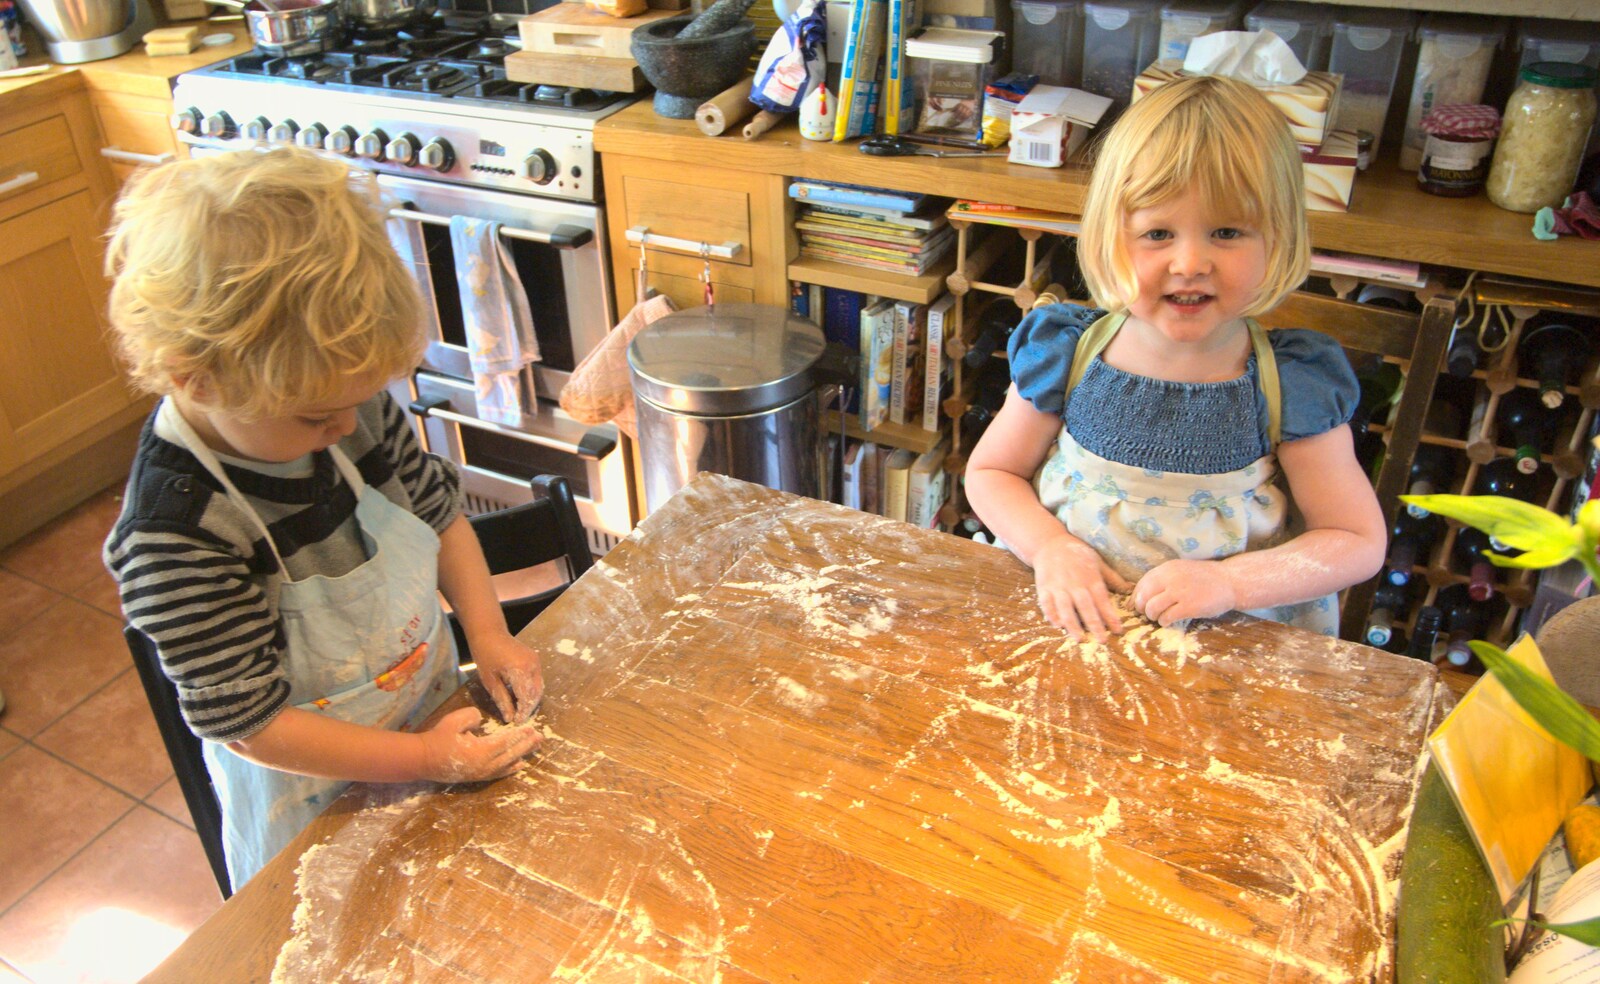 Fred and Lydia mess around in flour from Railway Graffiti, Fred's Balance Bike, and Lydia Visits - London and Brome, Suffolk, 24th August 2011